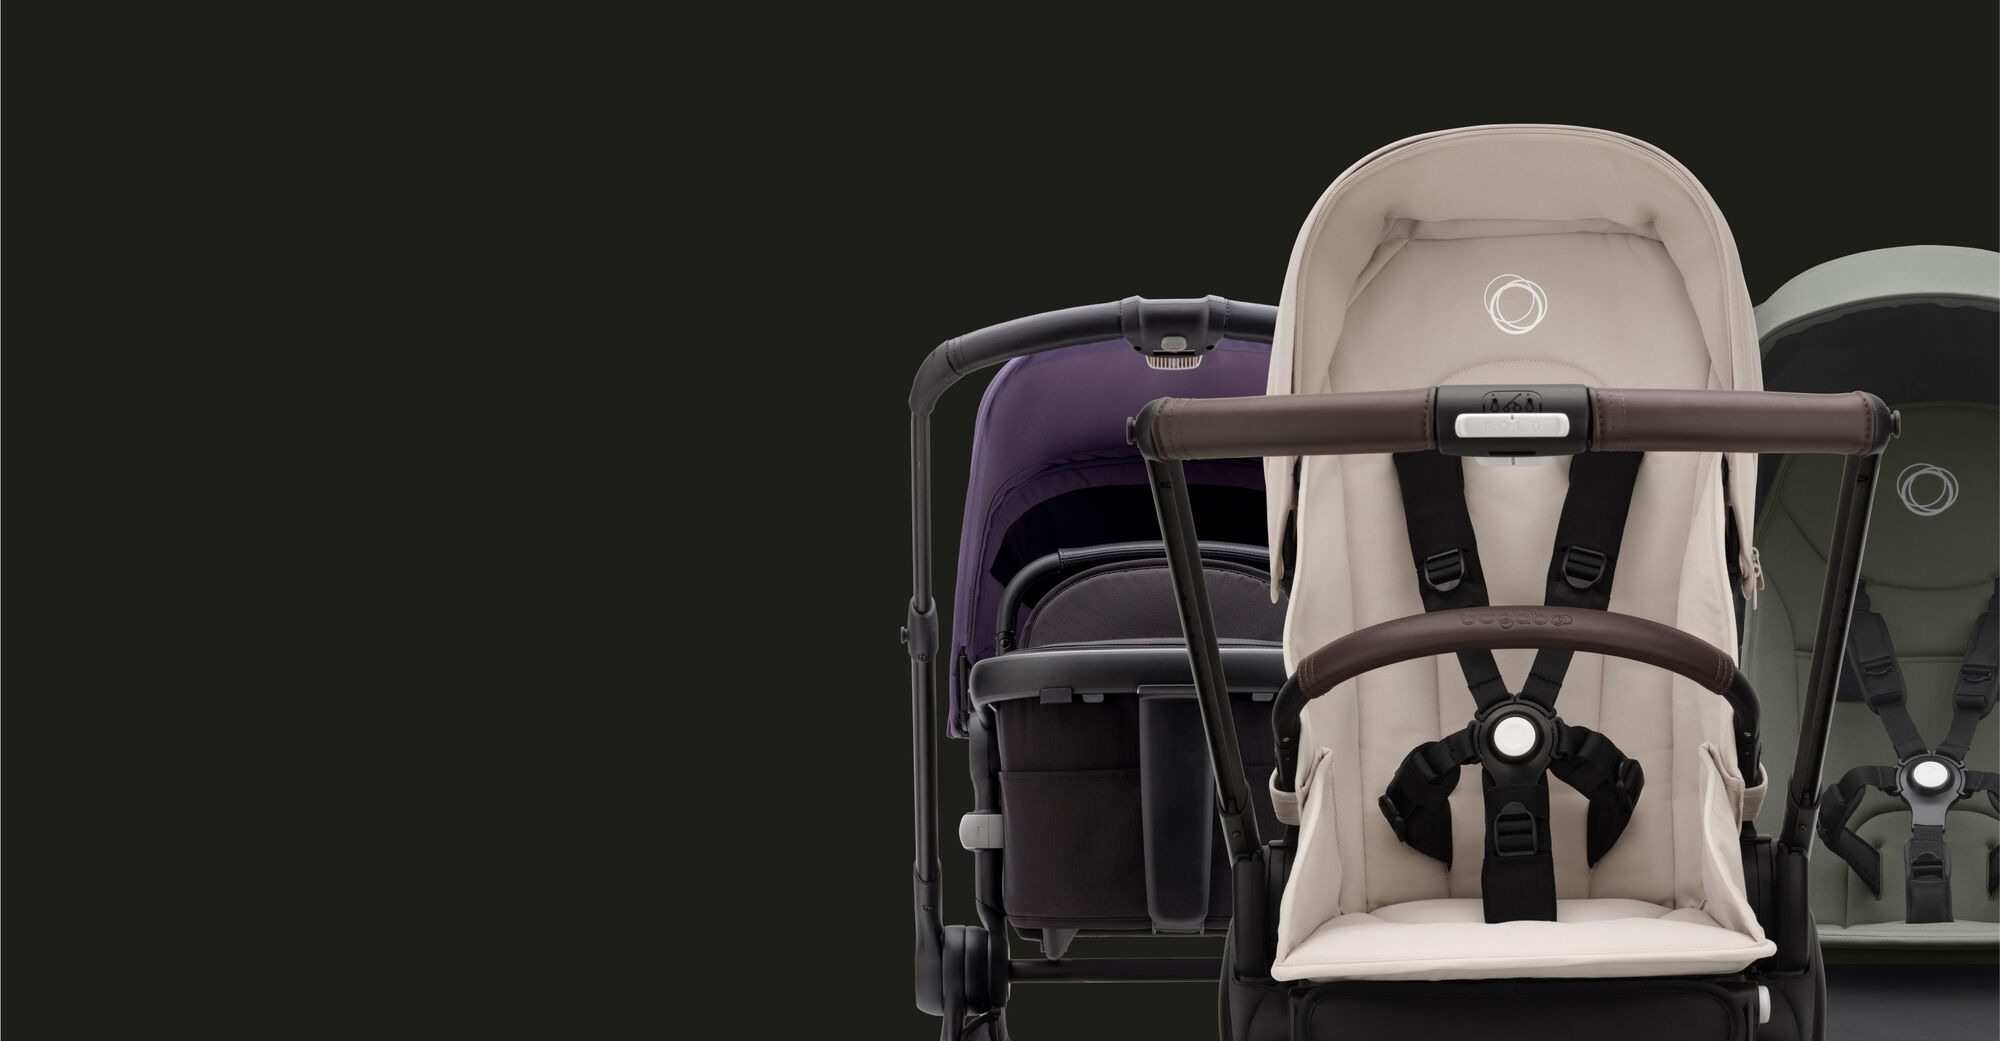 A lineup of a Bugaboo Dragonfly in Misty White fabrics, a Bugaboo Fox 5 in Astro Purple sun canopy, and a Bugaboo Butterfly in Forest Green fabrics